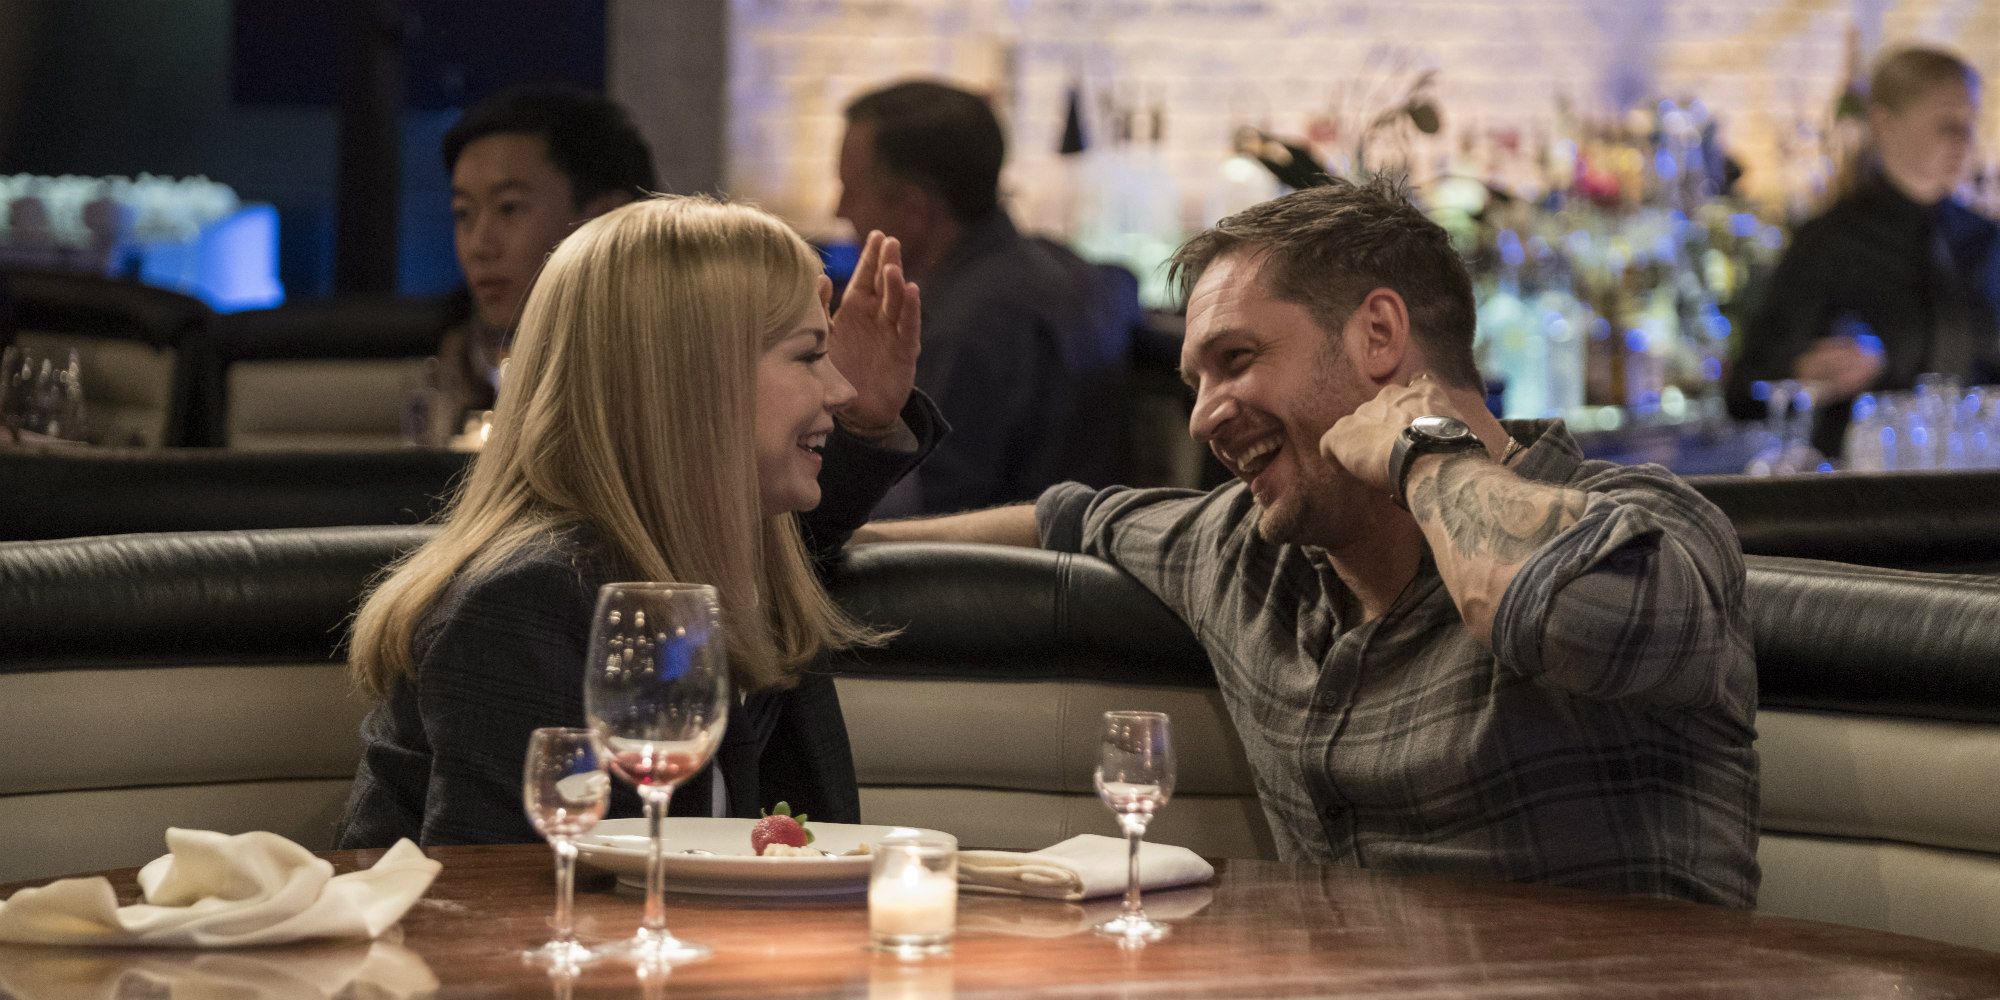 Michelle Williams and Tom Hardy talk at dinner in Venom.